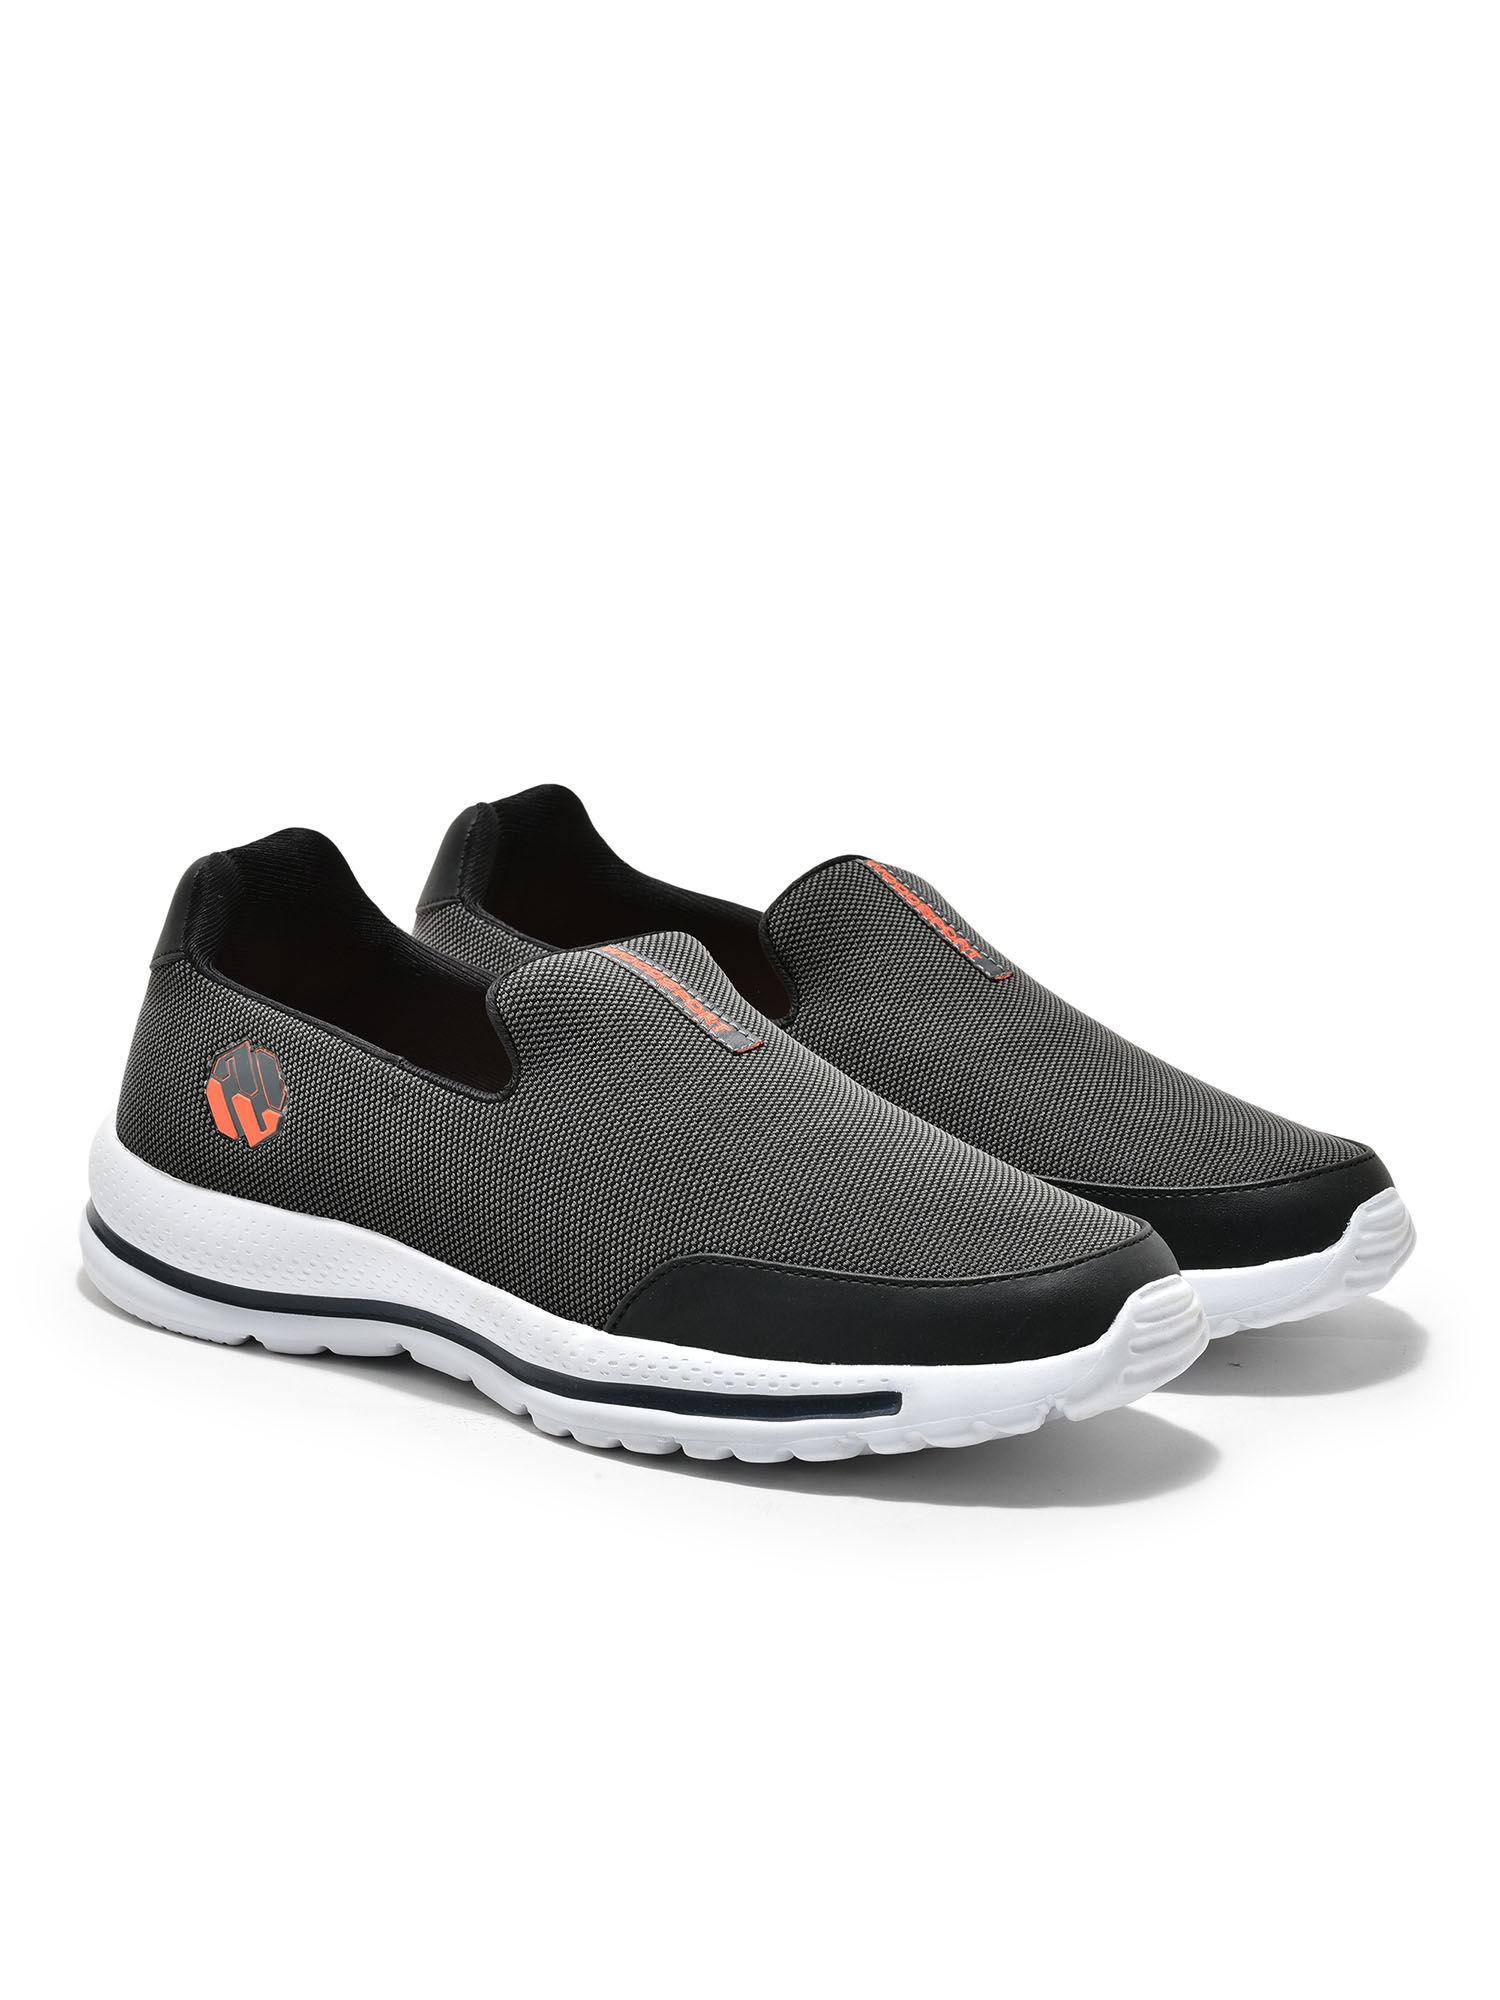 mens grey slip on textured sports shoes